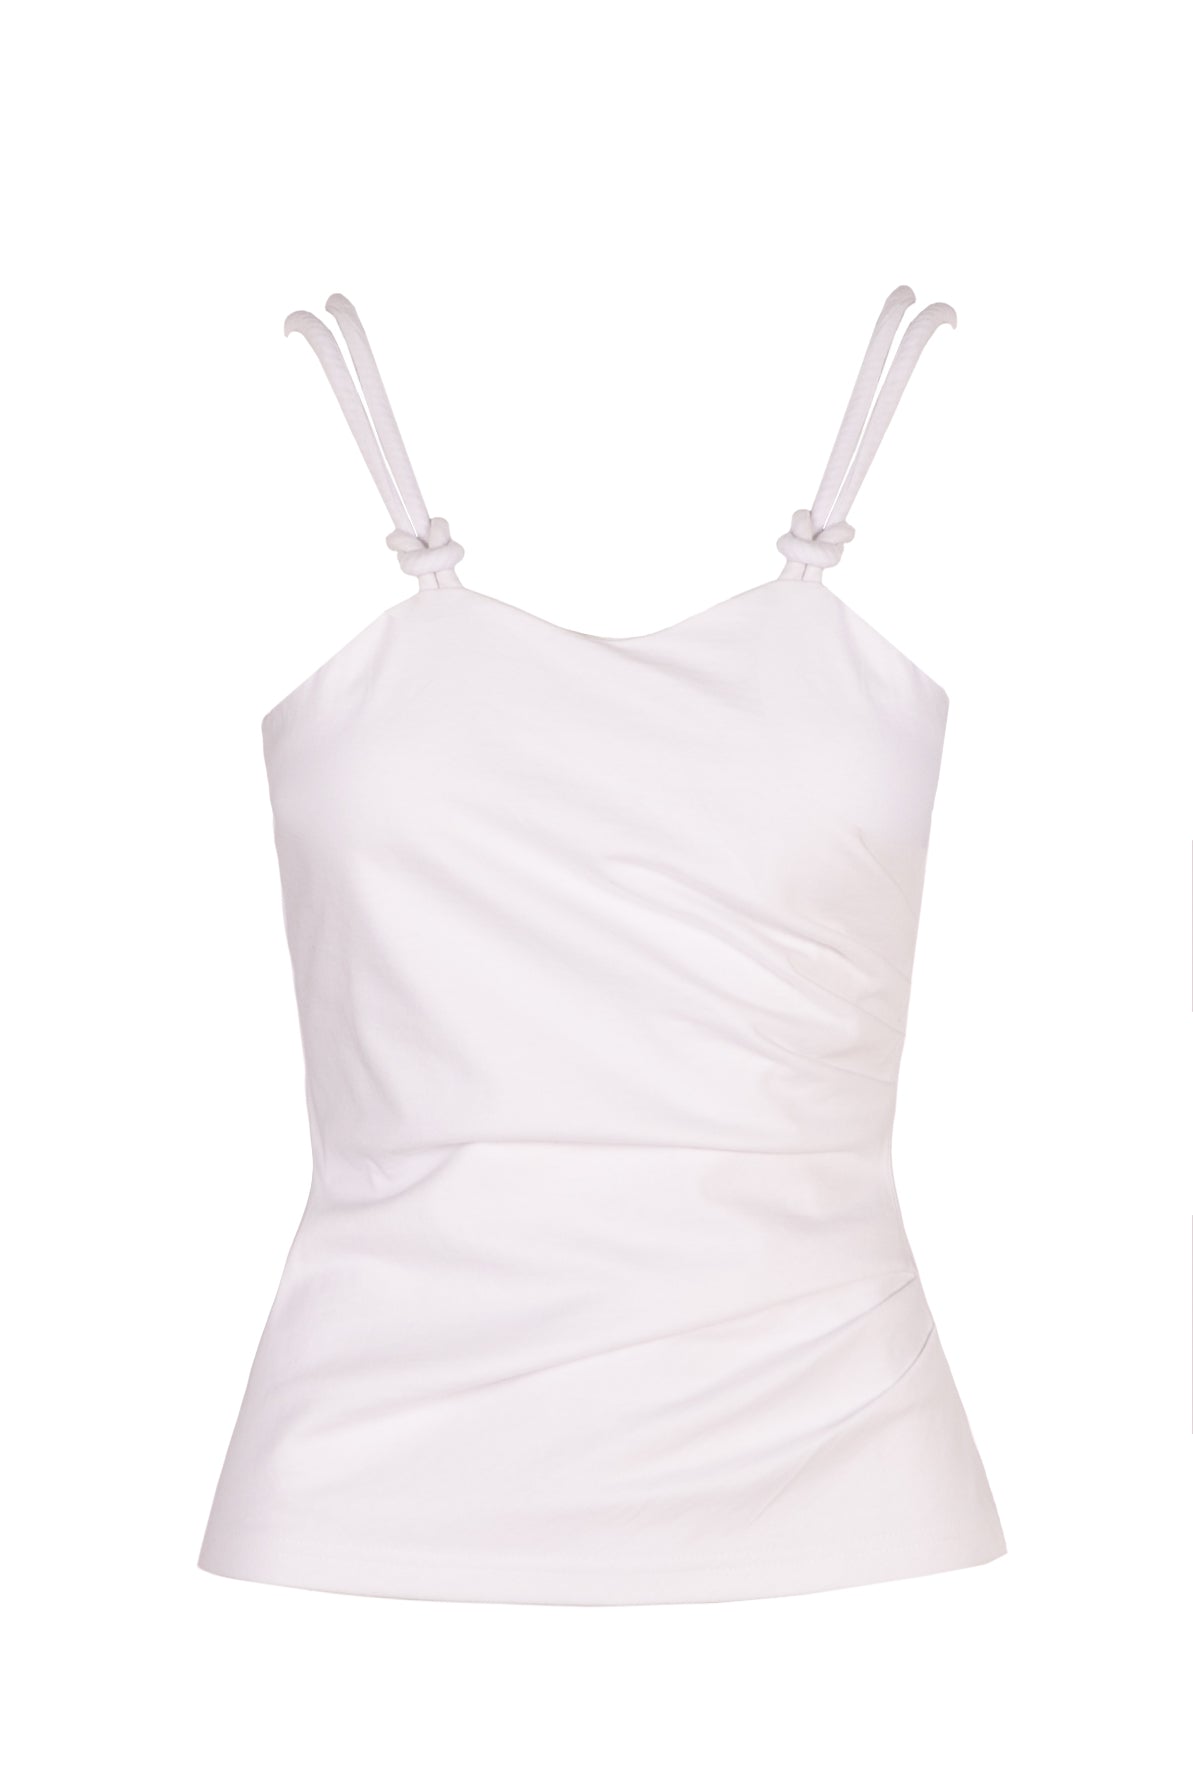 TOP WITH SHOULDER STRAPS